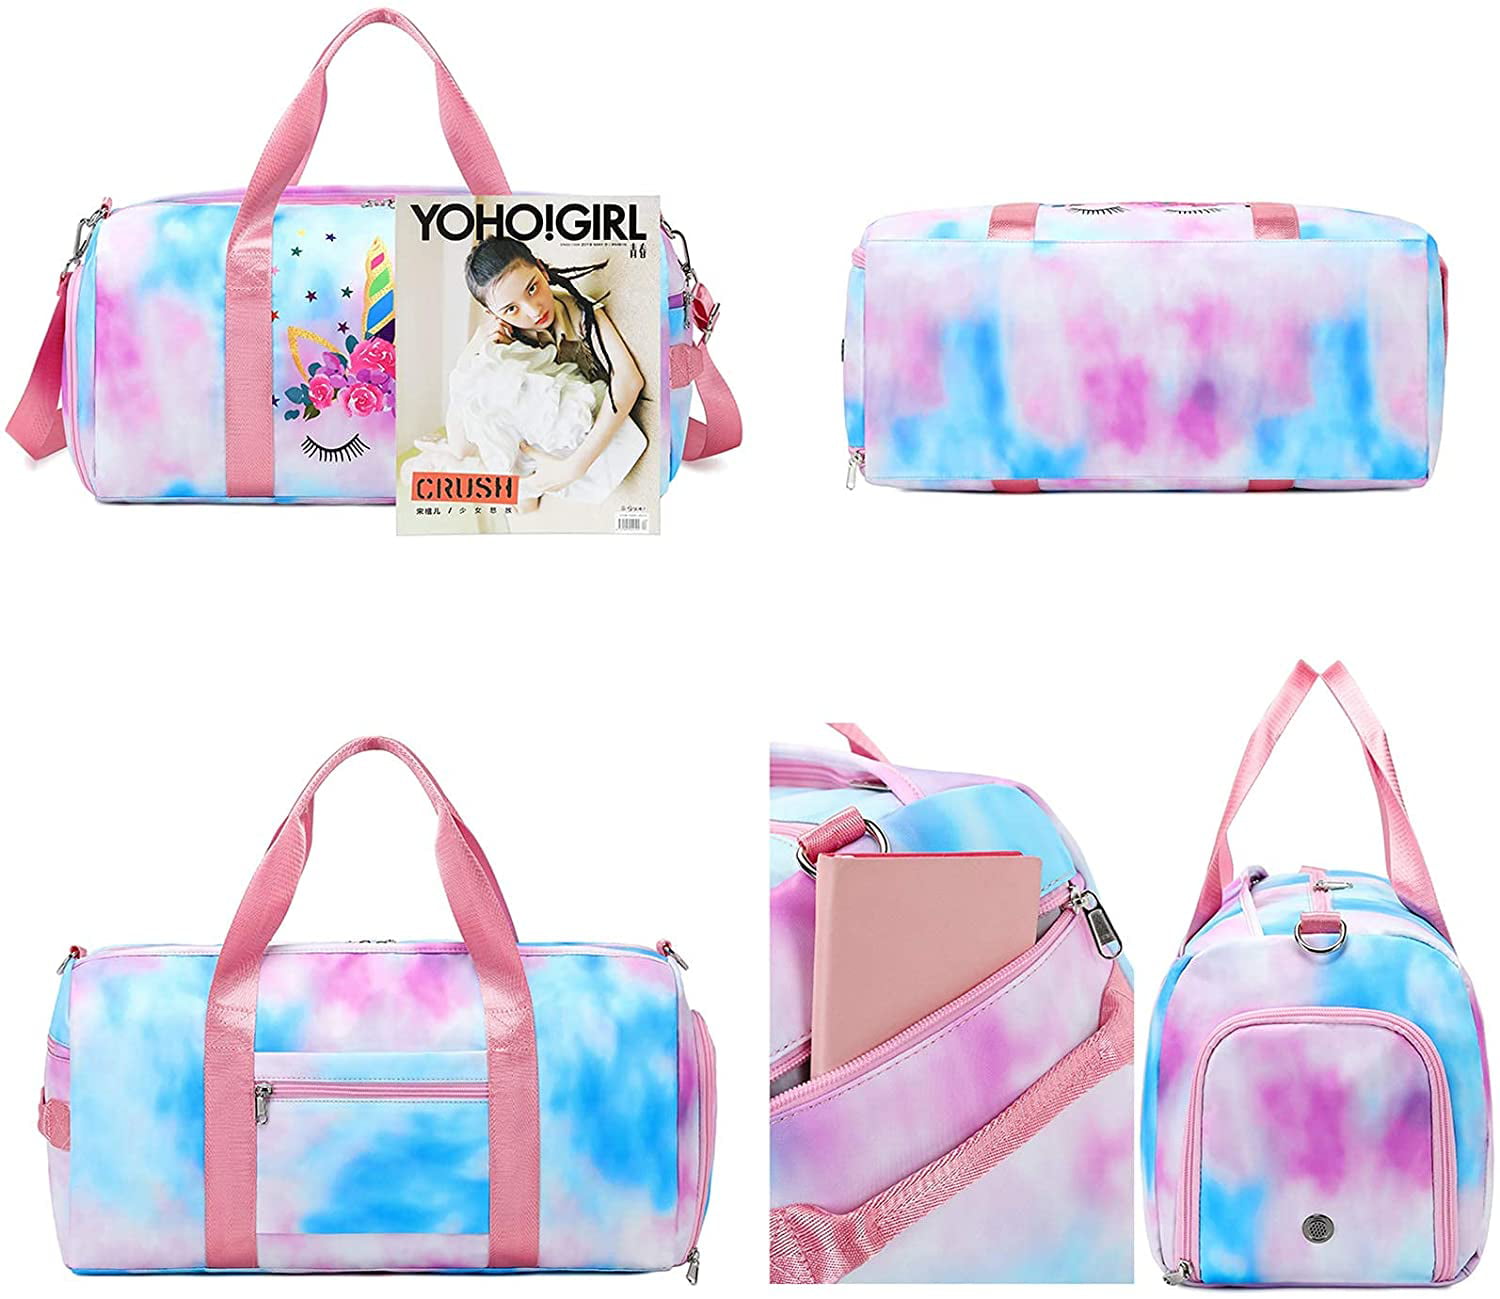 Tie Dye-Blue Duffle Bag for Girls Teen Sport Gym Bag Women Weekender Carry On Workout Duffel Overnight Shoulder Bag with Shoe Compartment 